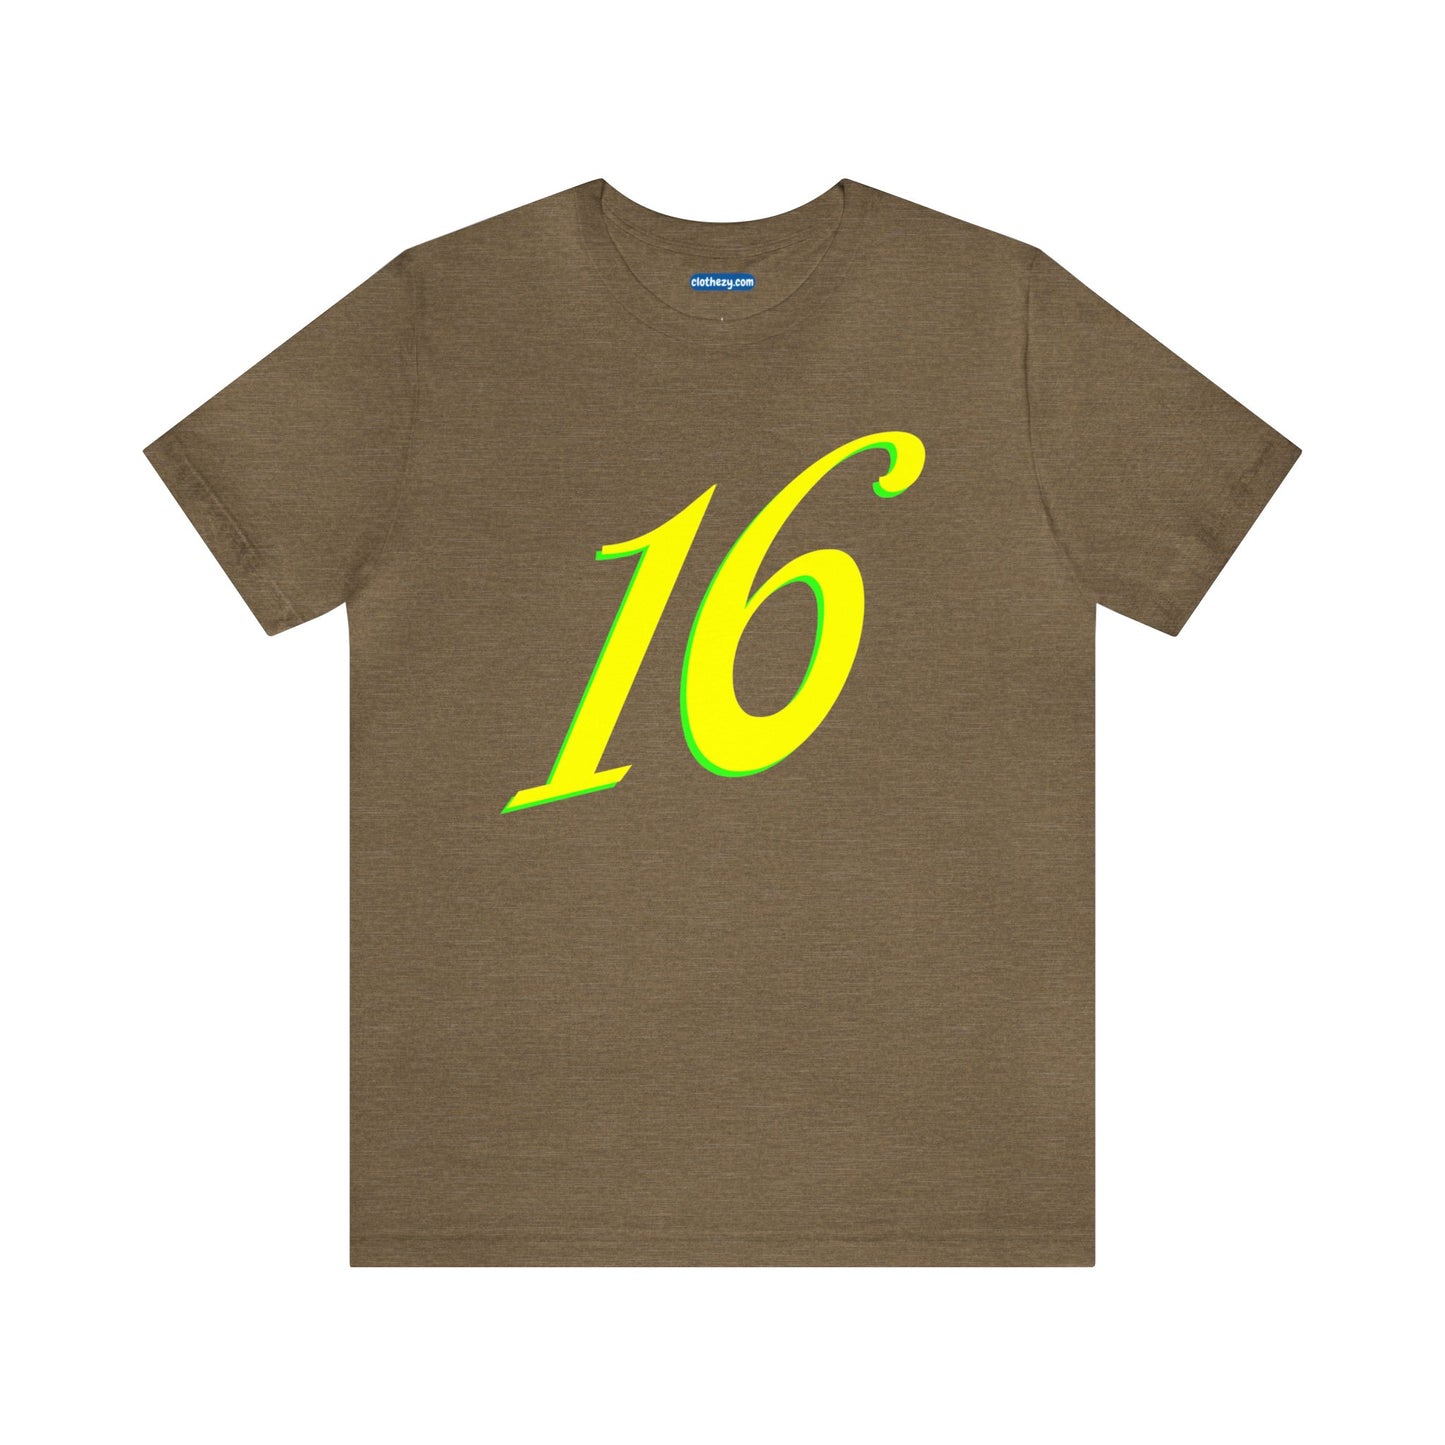 Number 16 Design - Soft Cotton Tee for birthdays and celebrations, Gift for friends and family, Multiple Options by clothezy.com in Olive Heather Size Small - Buy Now